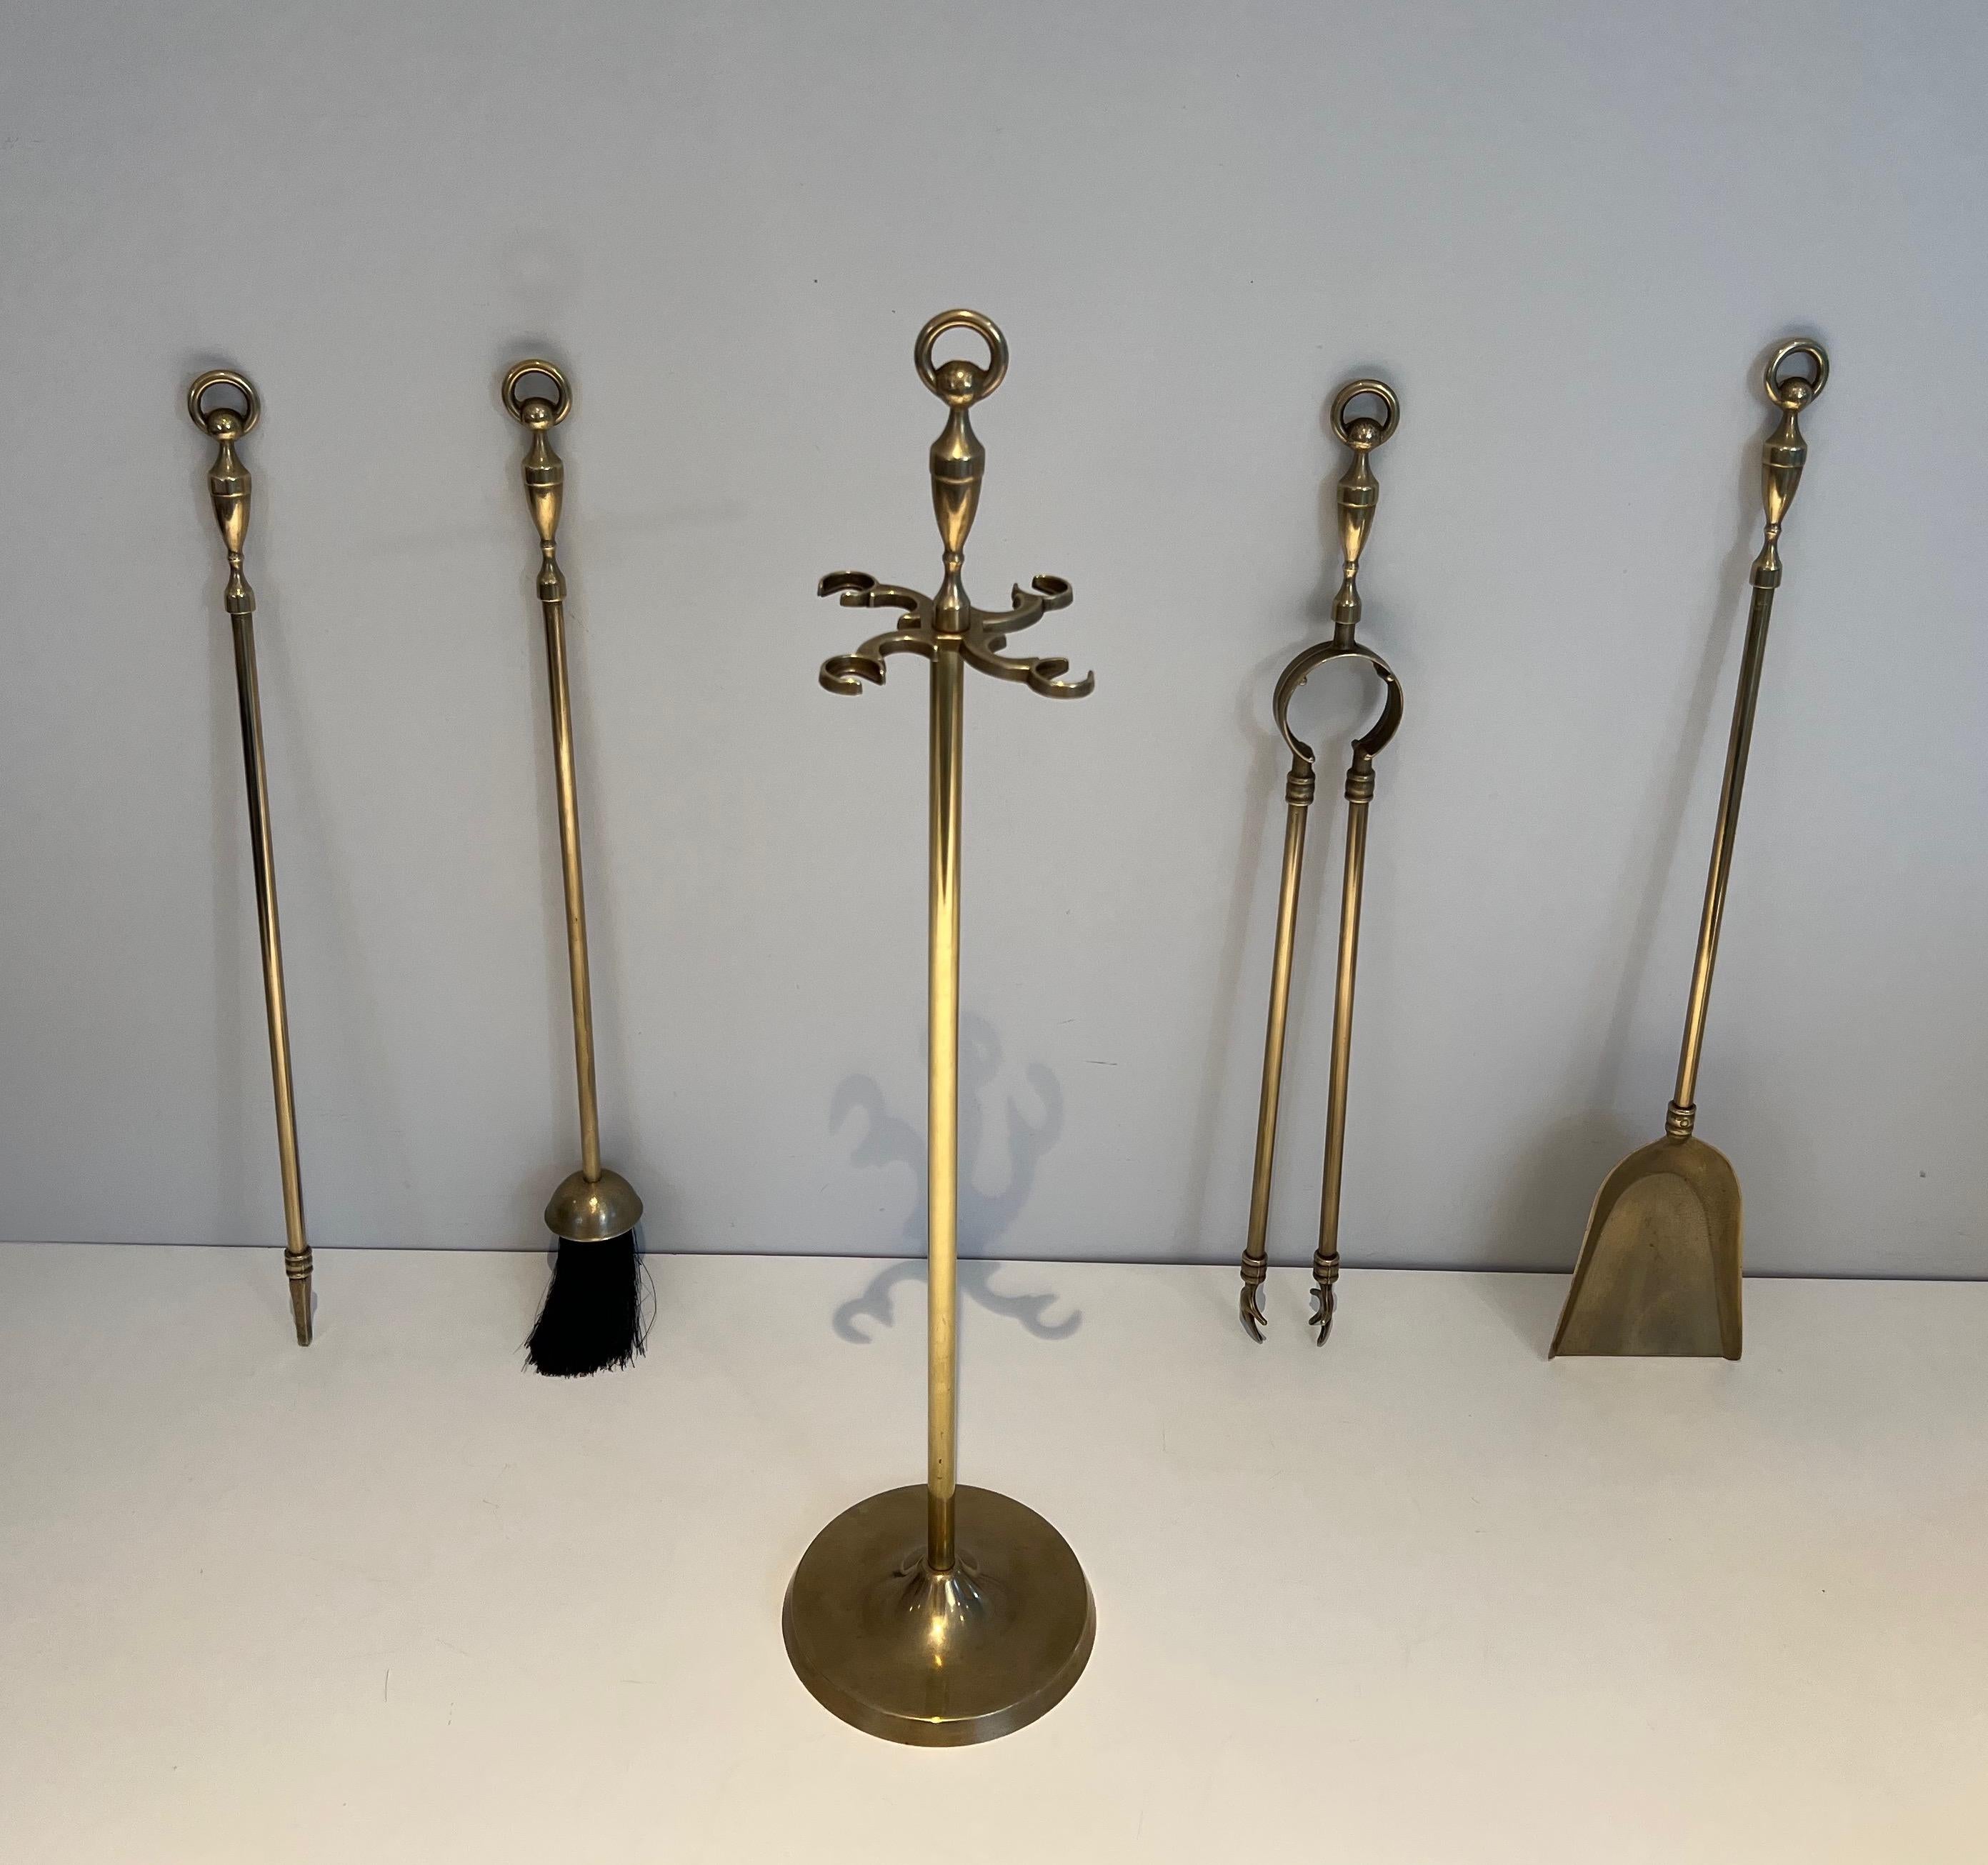 These neoclassical style fireplace tools are made of brass. This is a French work, circa 1970.